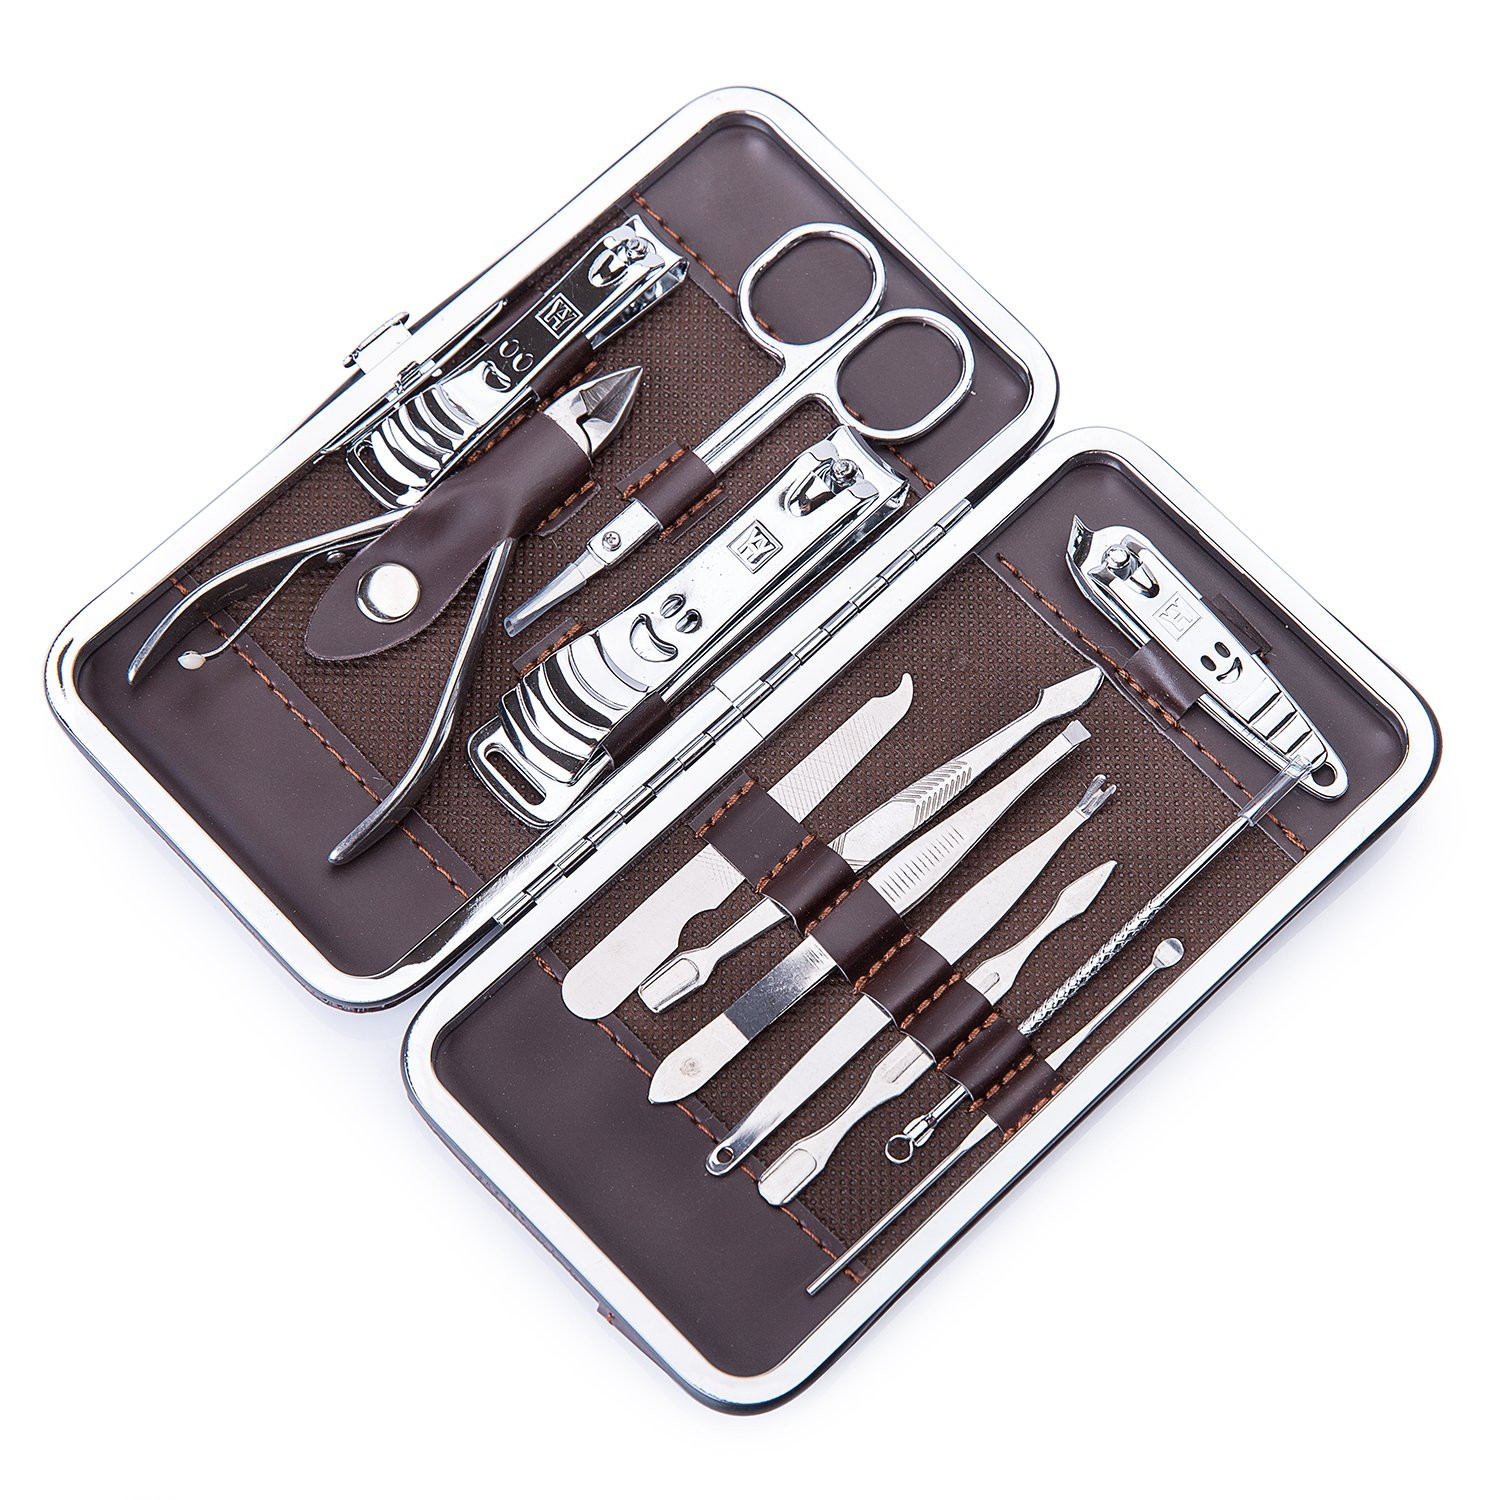 Maniküre Set Amazon
 Corewill Manicure Set Nail Clippers Set Stainless Steel